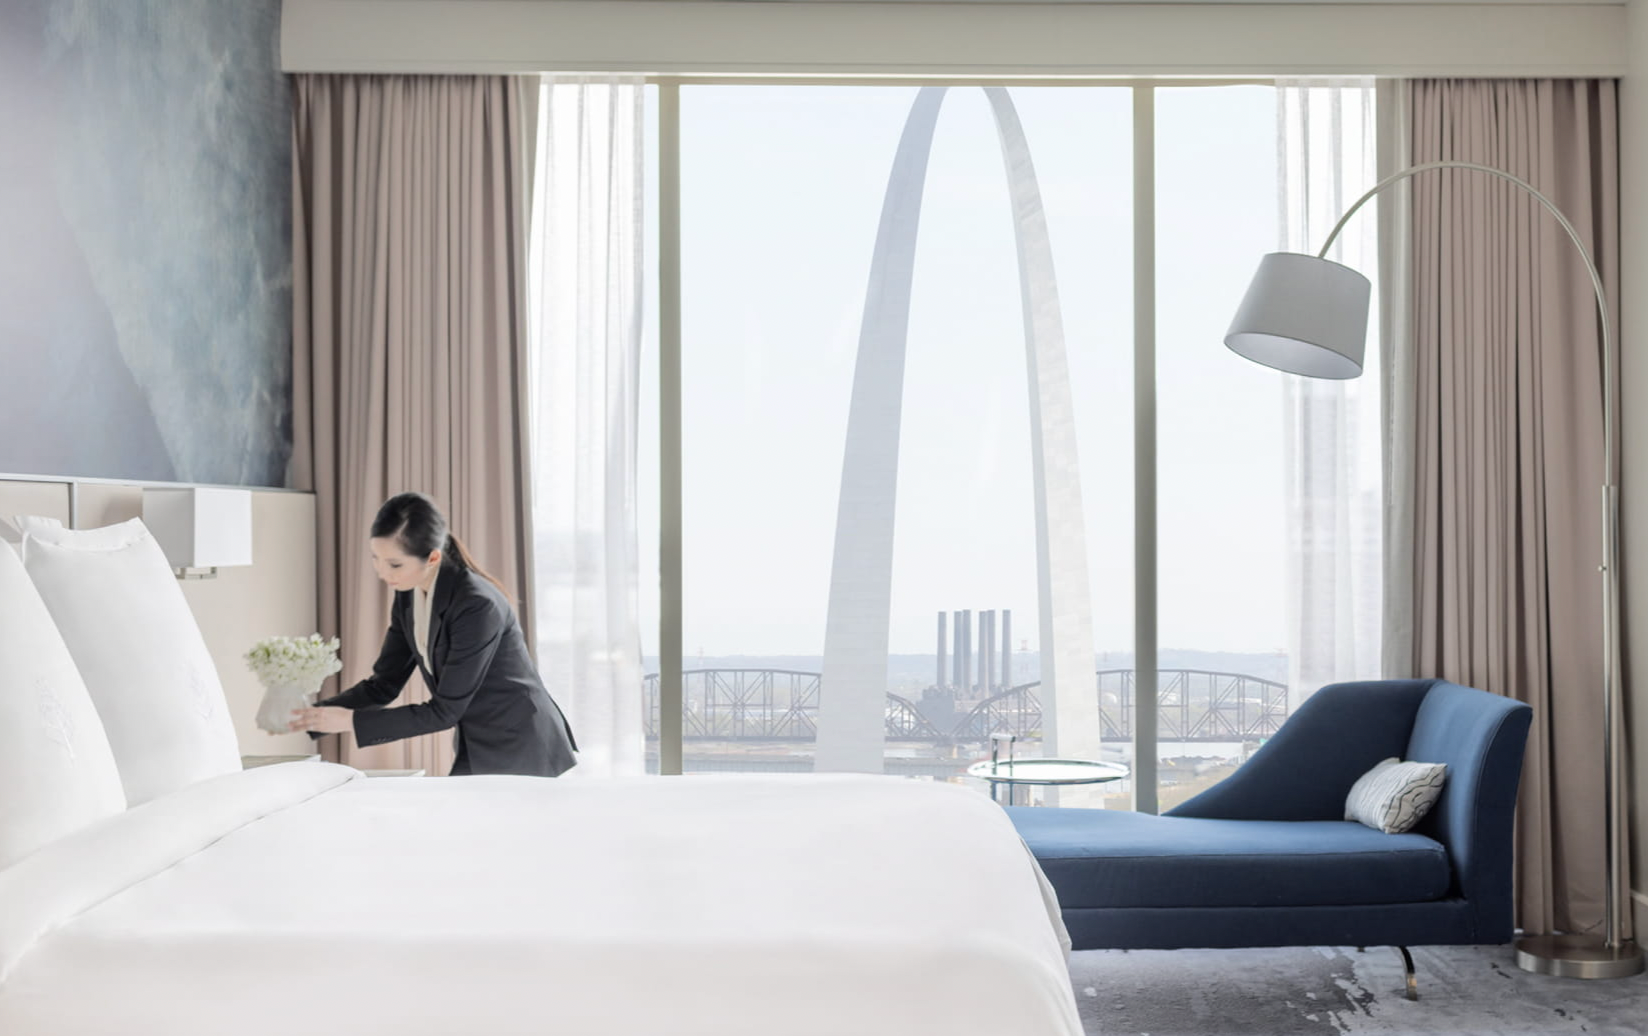 Rest Well: 5 Hotels That Prioritize Sleep With Specialized Programs And Amenities For Guests